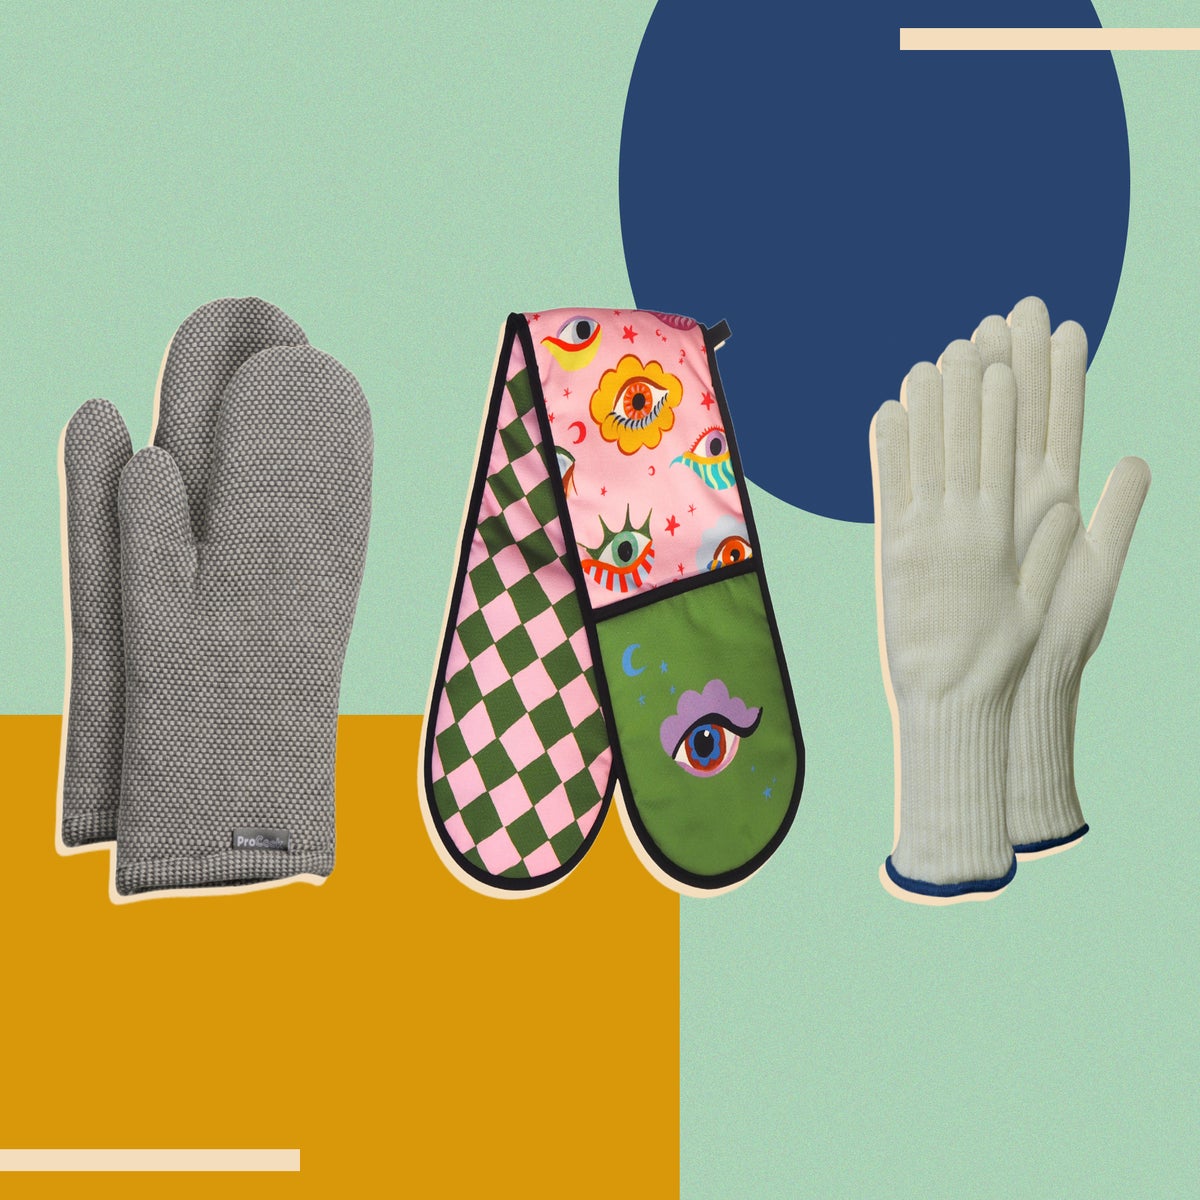 Our Top 10 Best Oven Gloves